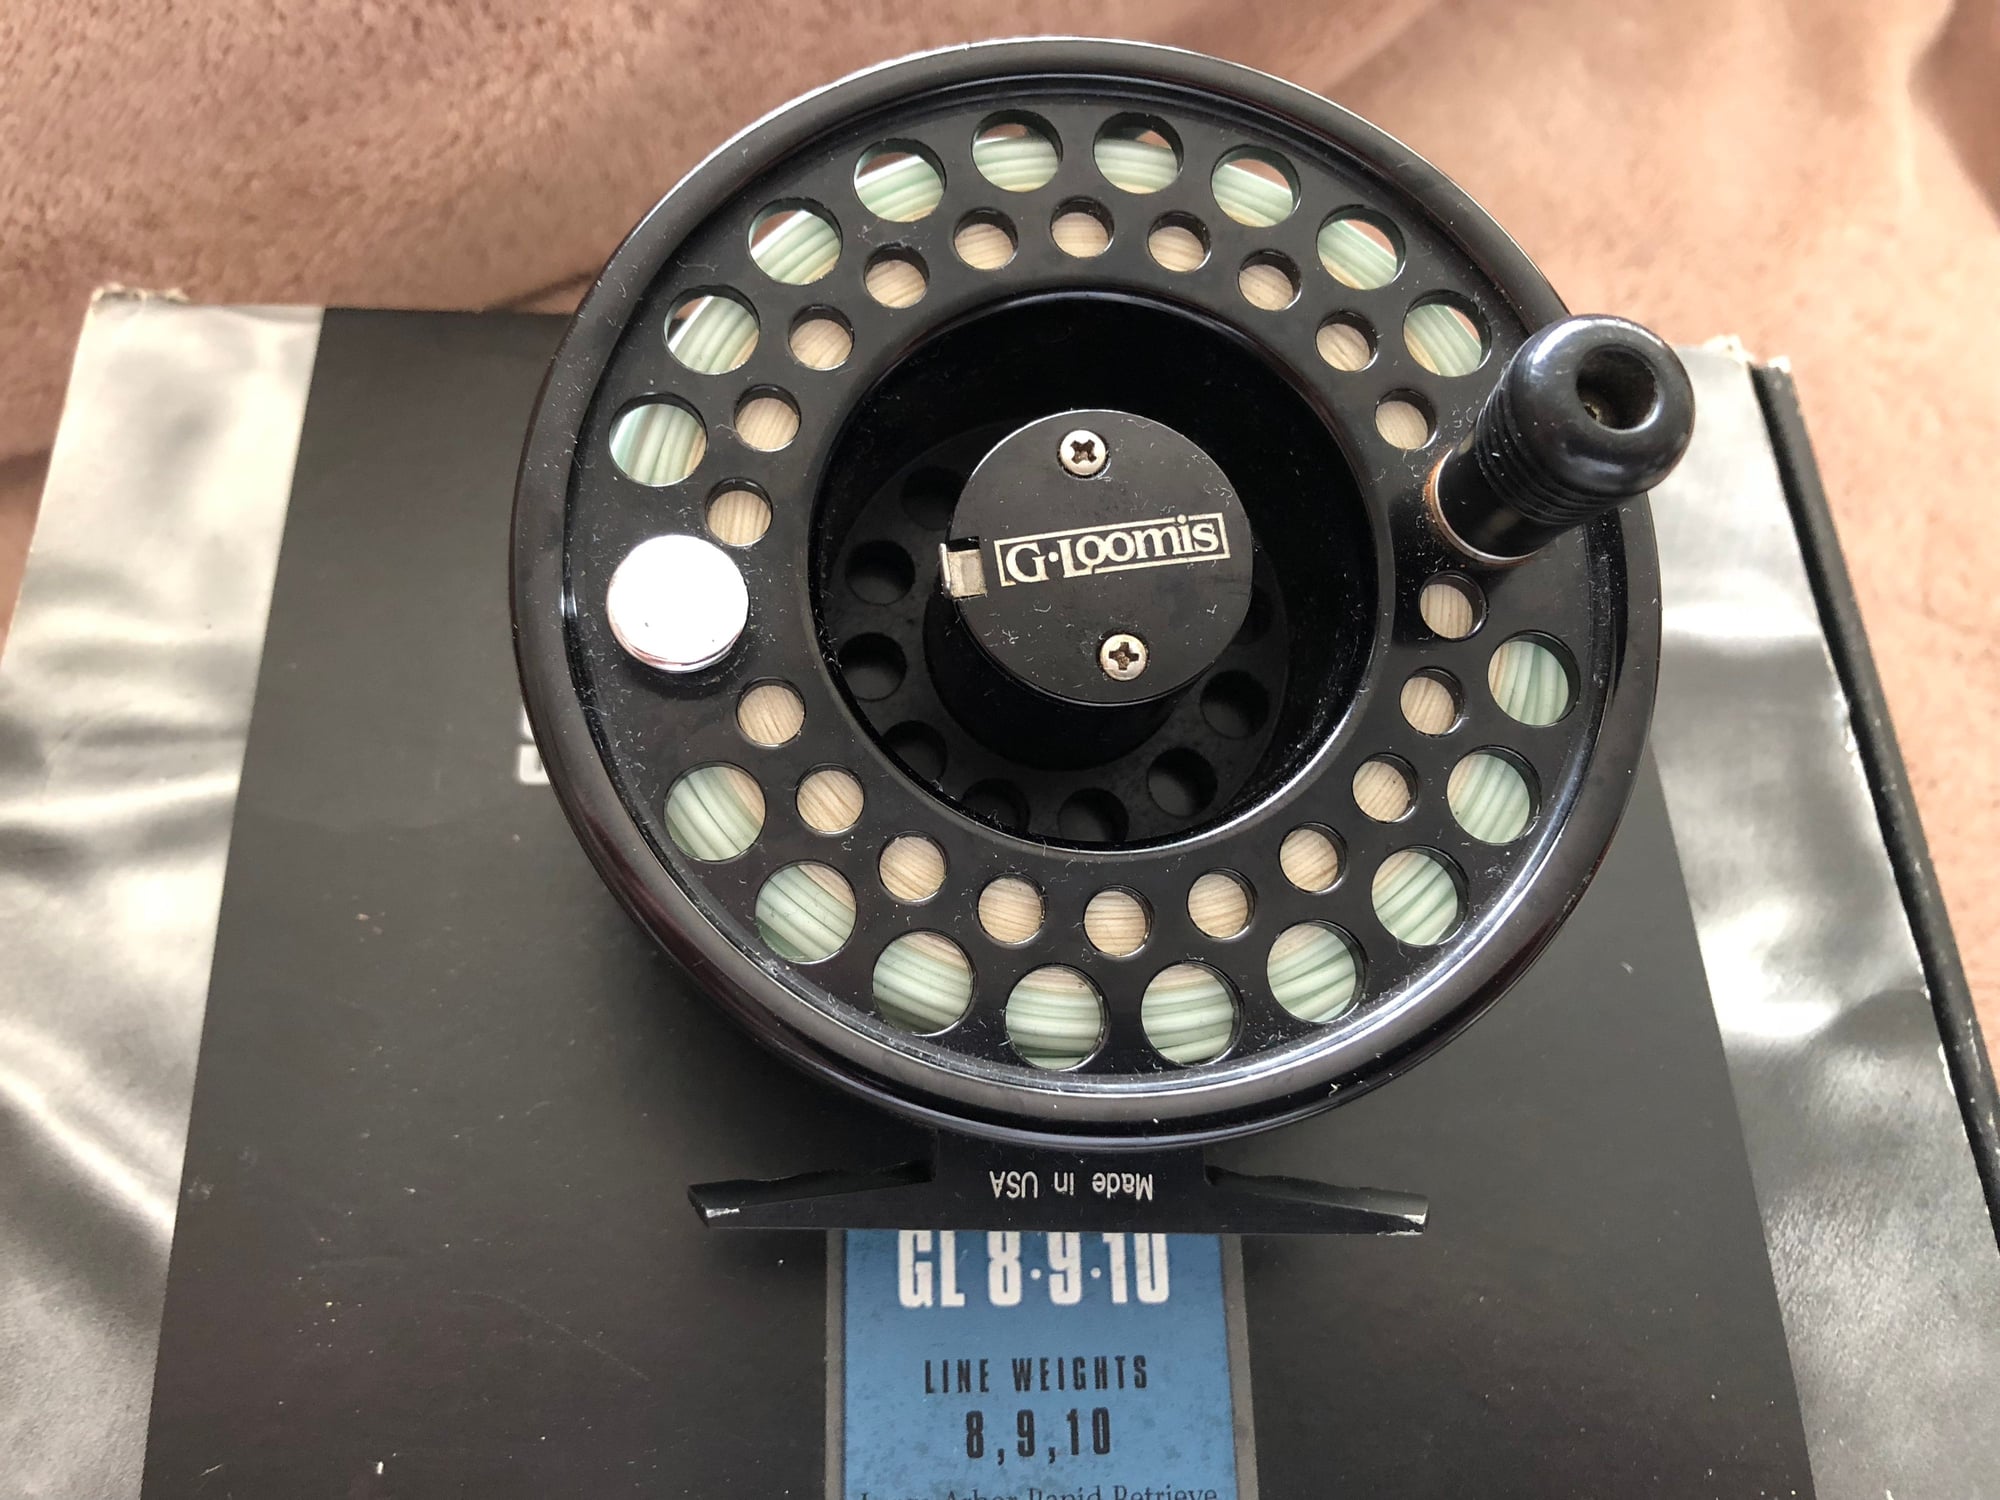 SOLD-G.Loomis Syncrotech 8/9/10 Fly Reel 9+/10 in box (Trades/Offers  Considered) - The Hull Truth - Boating and Fishing Forum